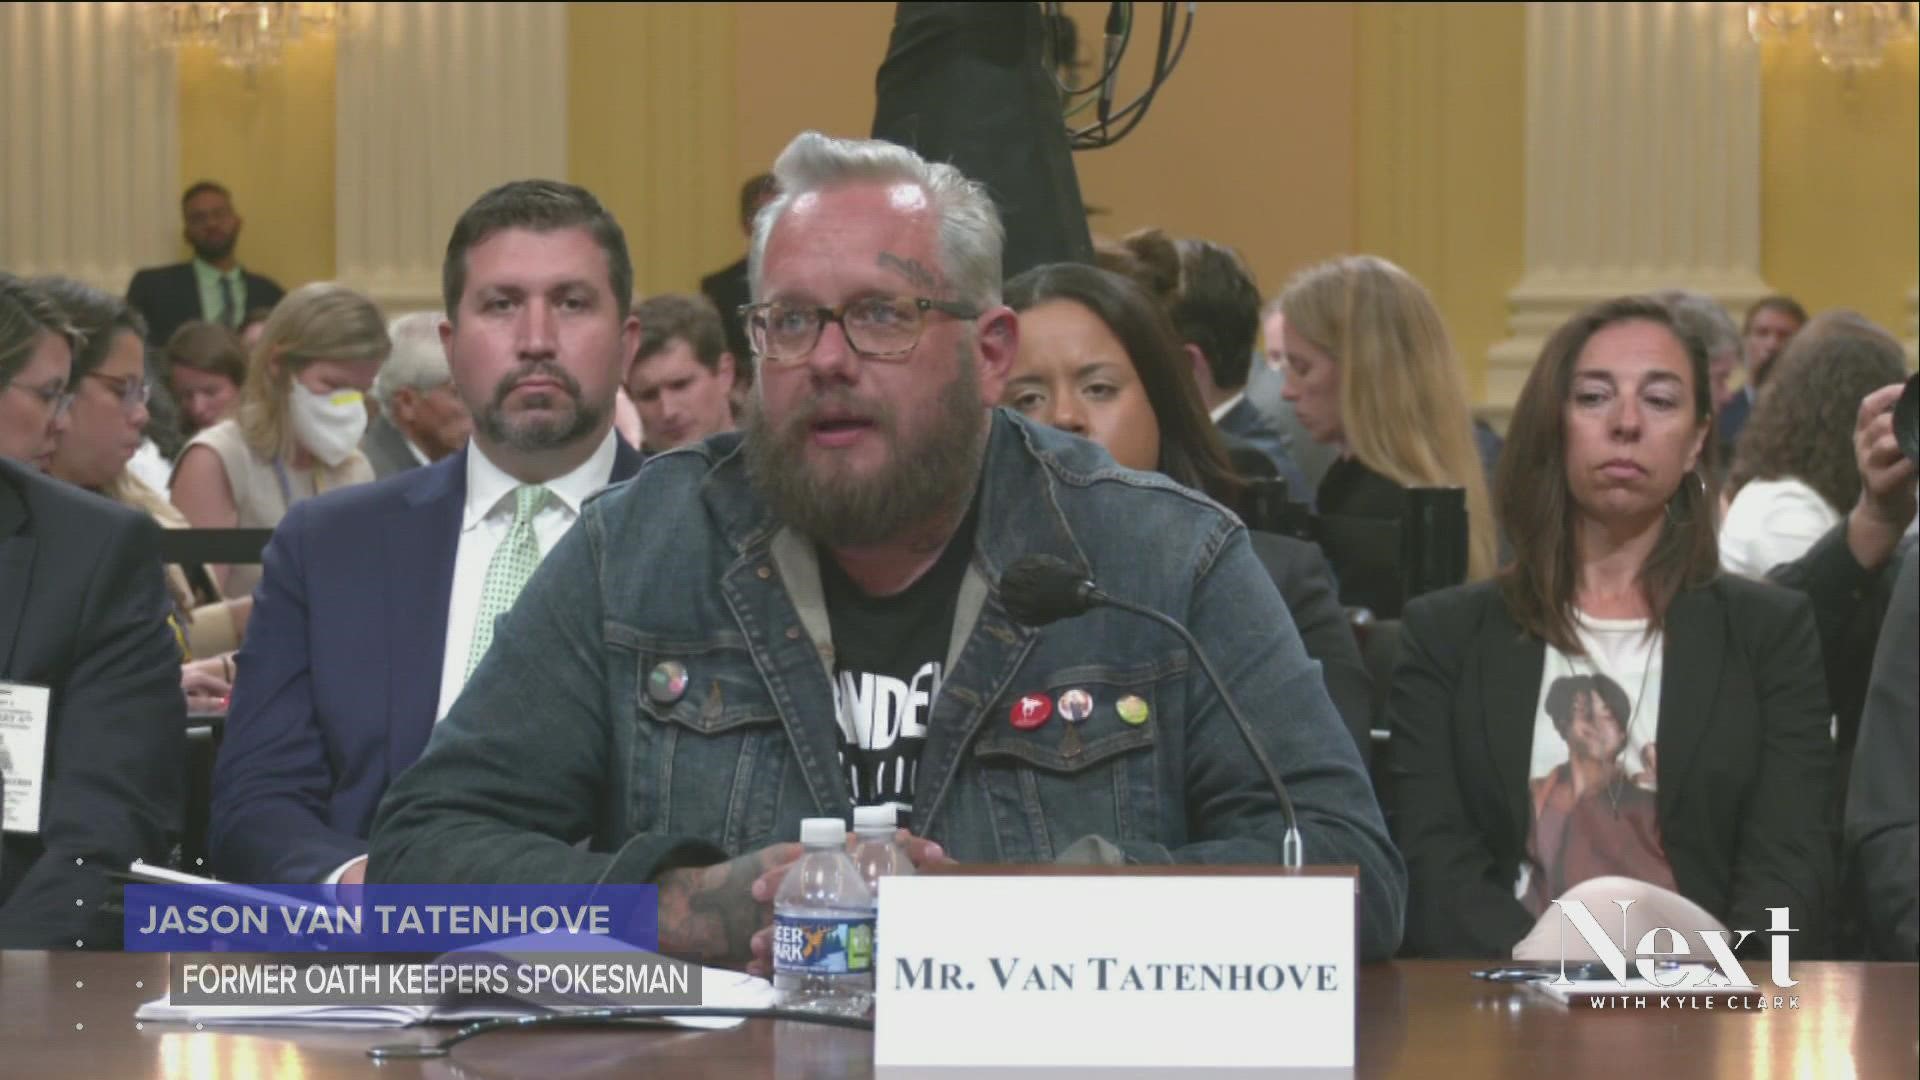 Jason Van Tatenhove, who lives in Estes Park, used to be a spokesperson for the far-right militia group. He told the Jan. 6 Committee he fears for the next election.